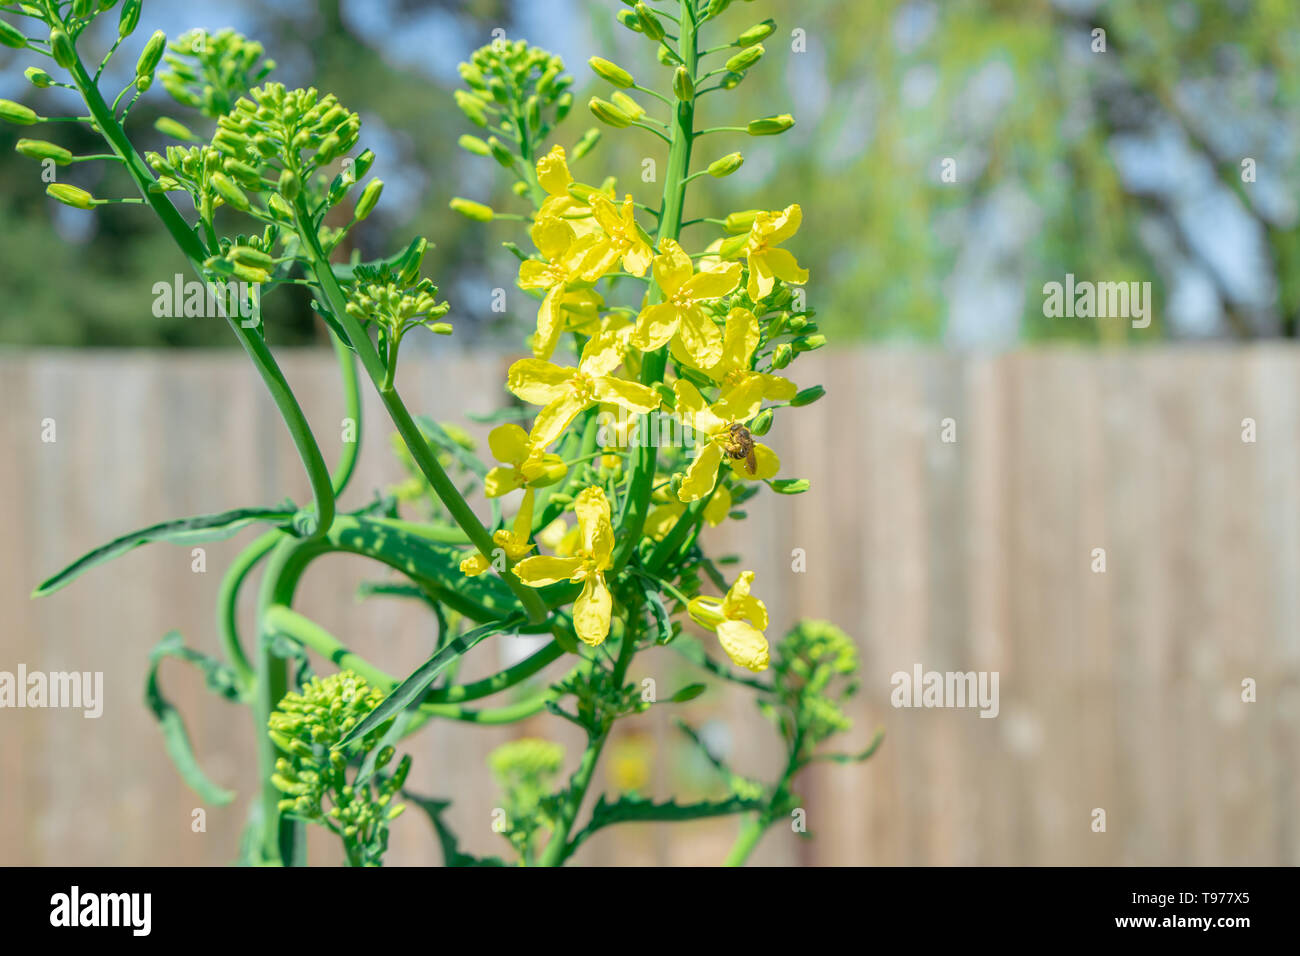 Kale biennial plant bolting (i.e. going to seed) in the spring. Image shows a bee pollinating the yellow kale flowers in a home garden. Stock Photo